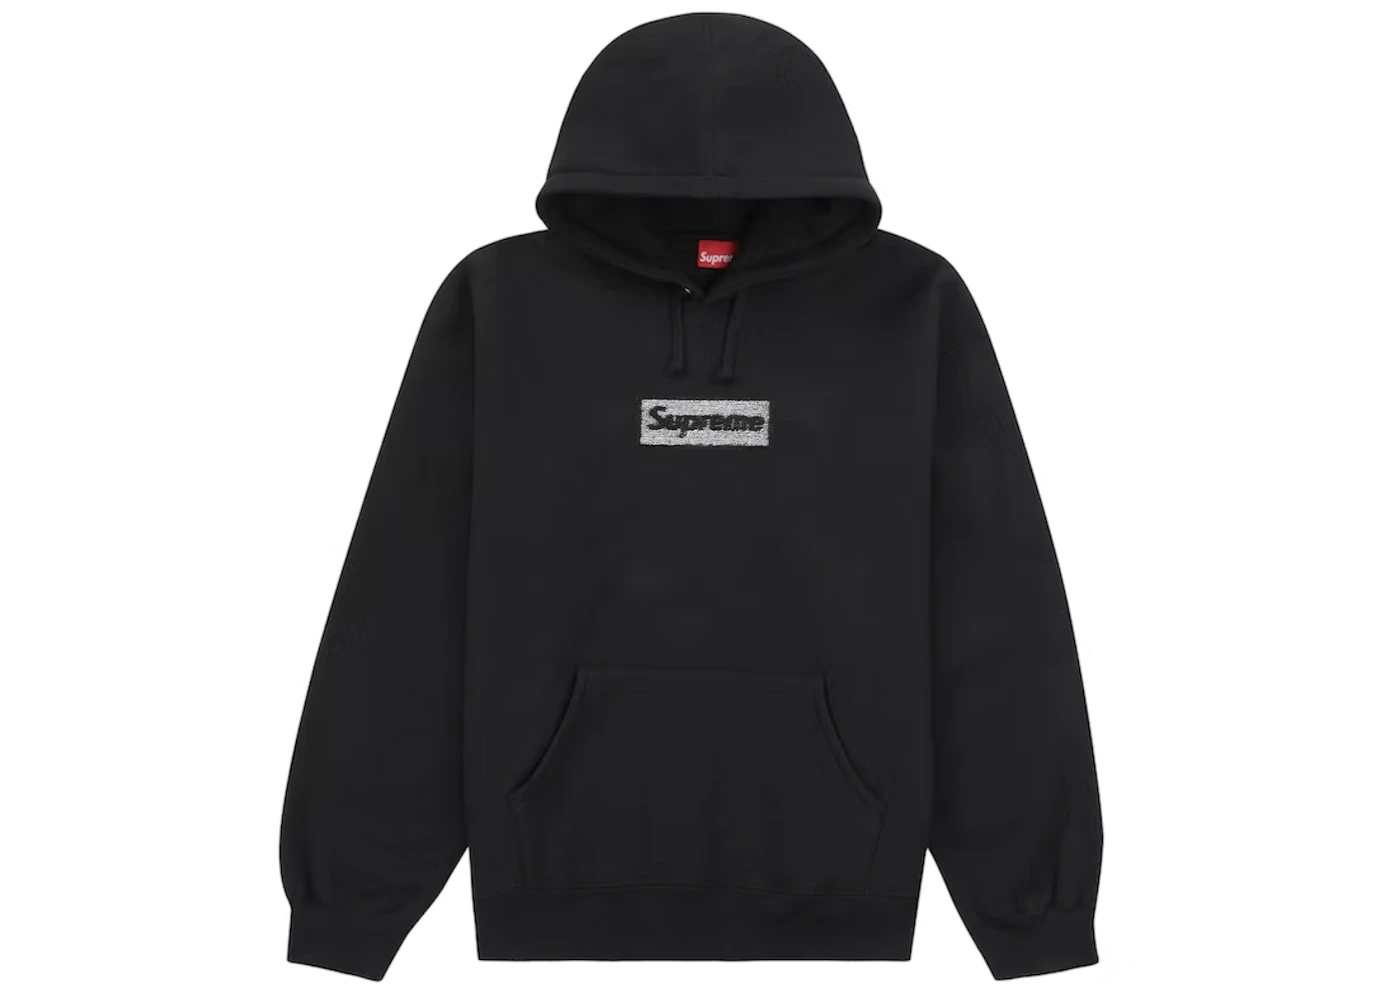 supreme Inside Out Box Logo Hooded